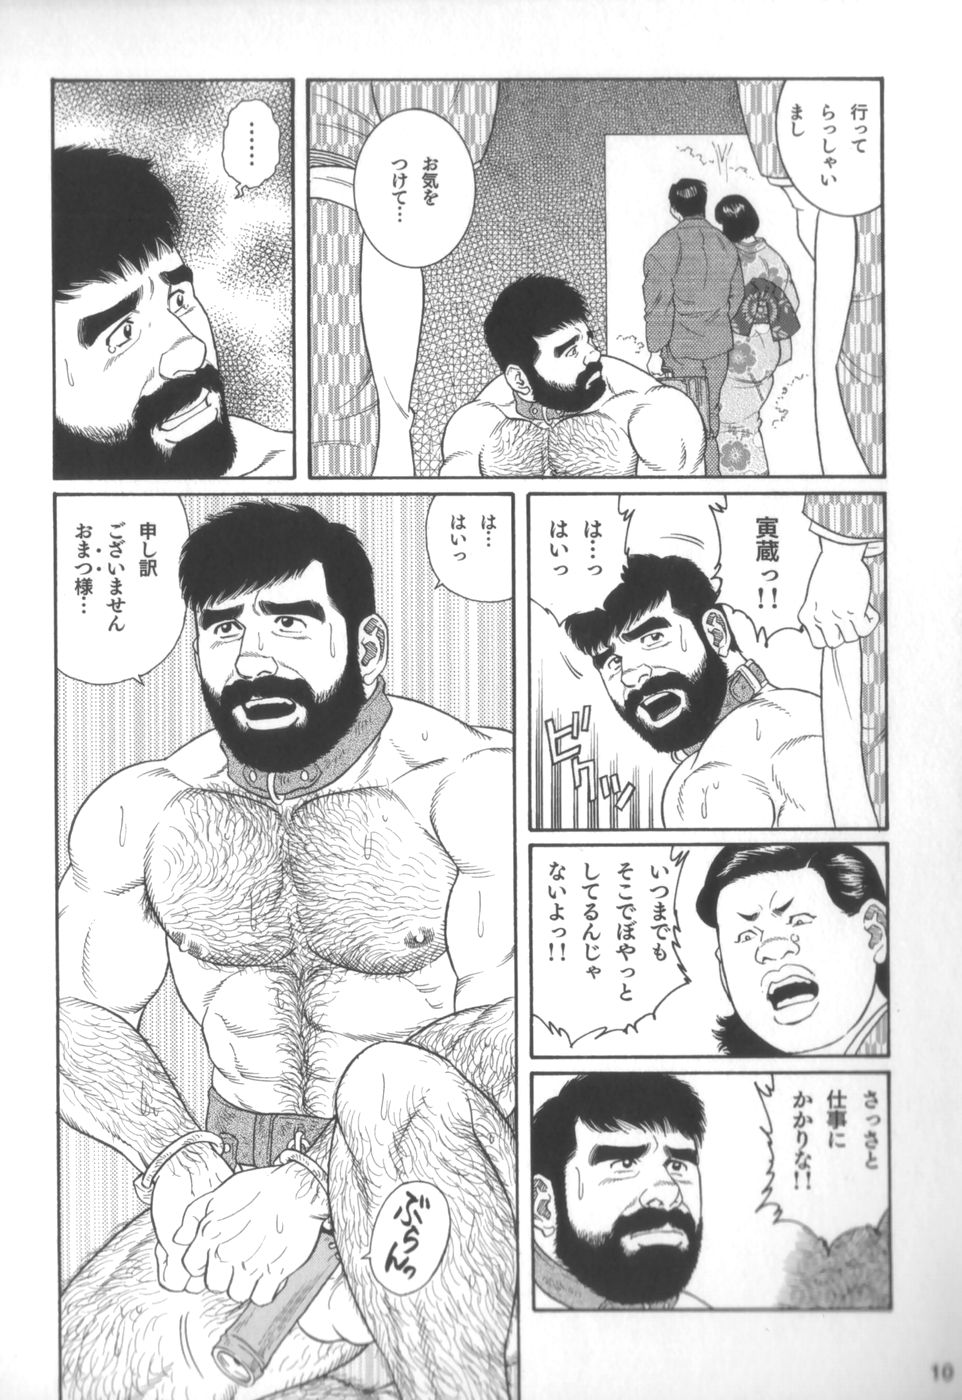 [Gengoroh Tagame] House of Brutes Vol 2 page 9 full